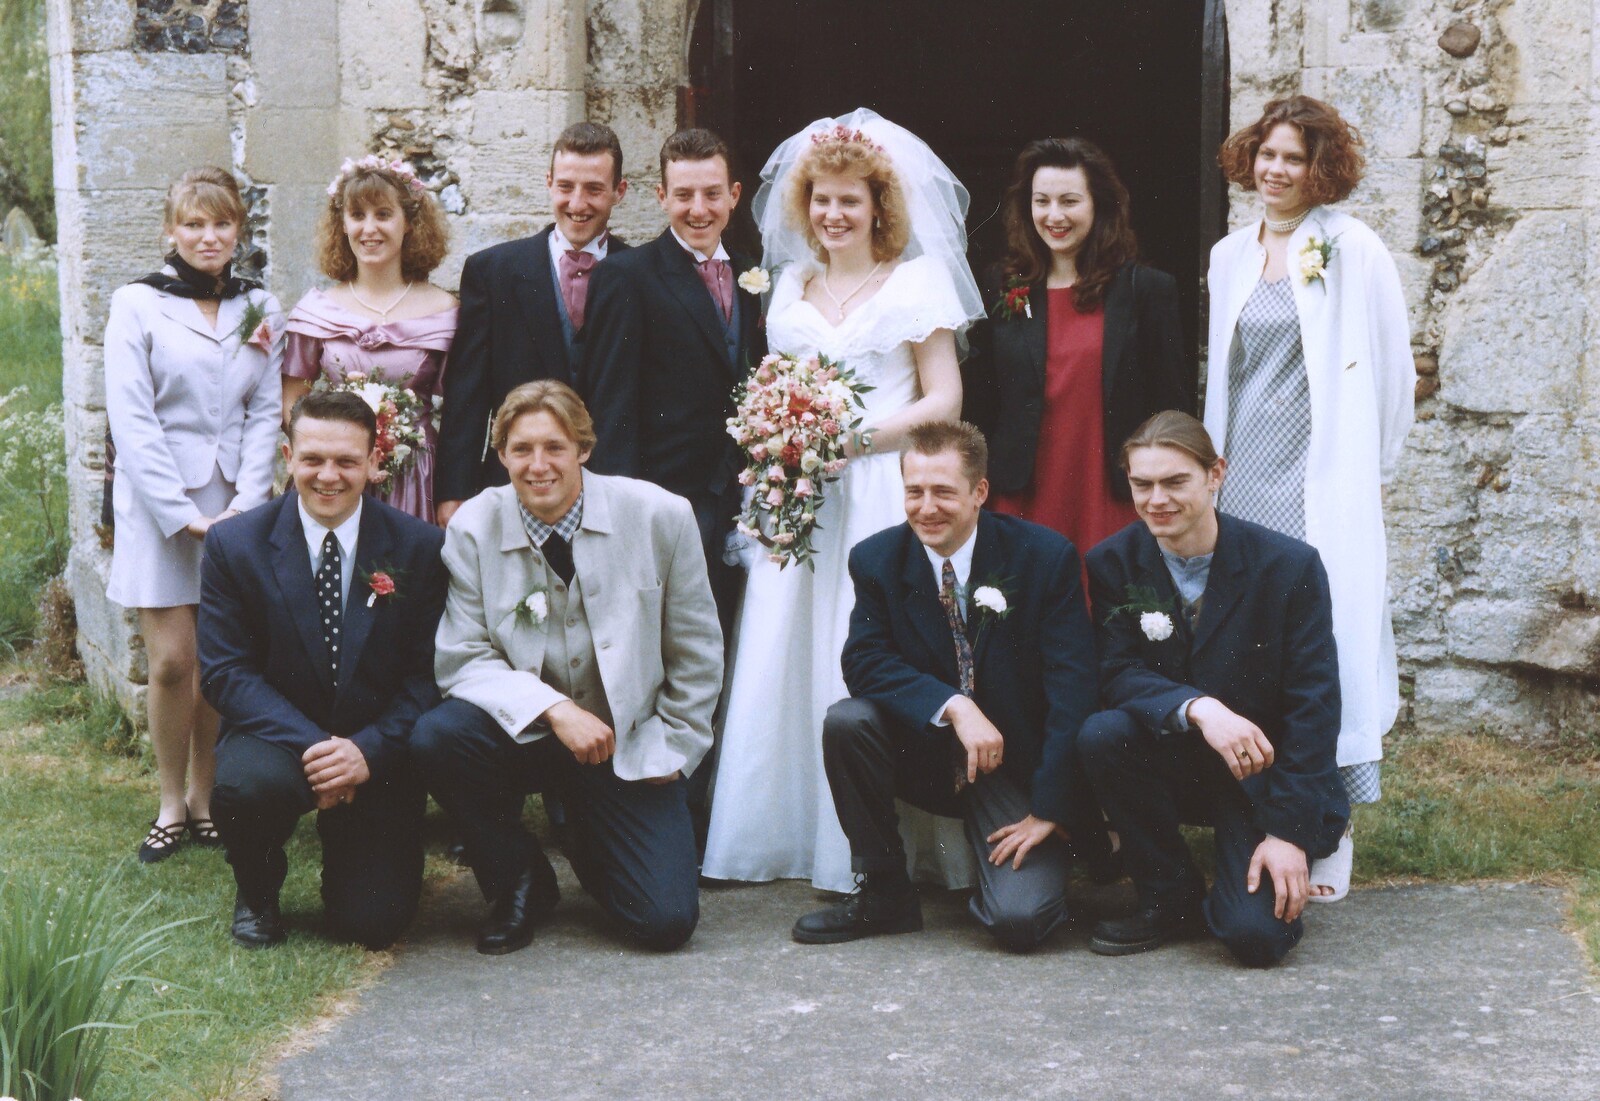 A wedding group photo from Debbie's Wedding, Suffolk - 12th June 1999